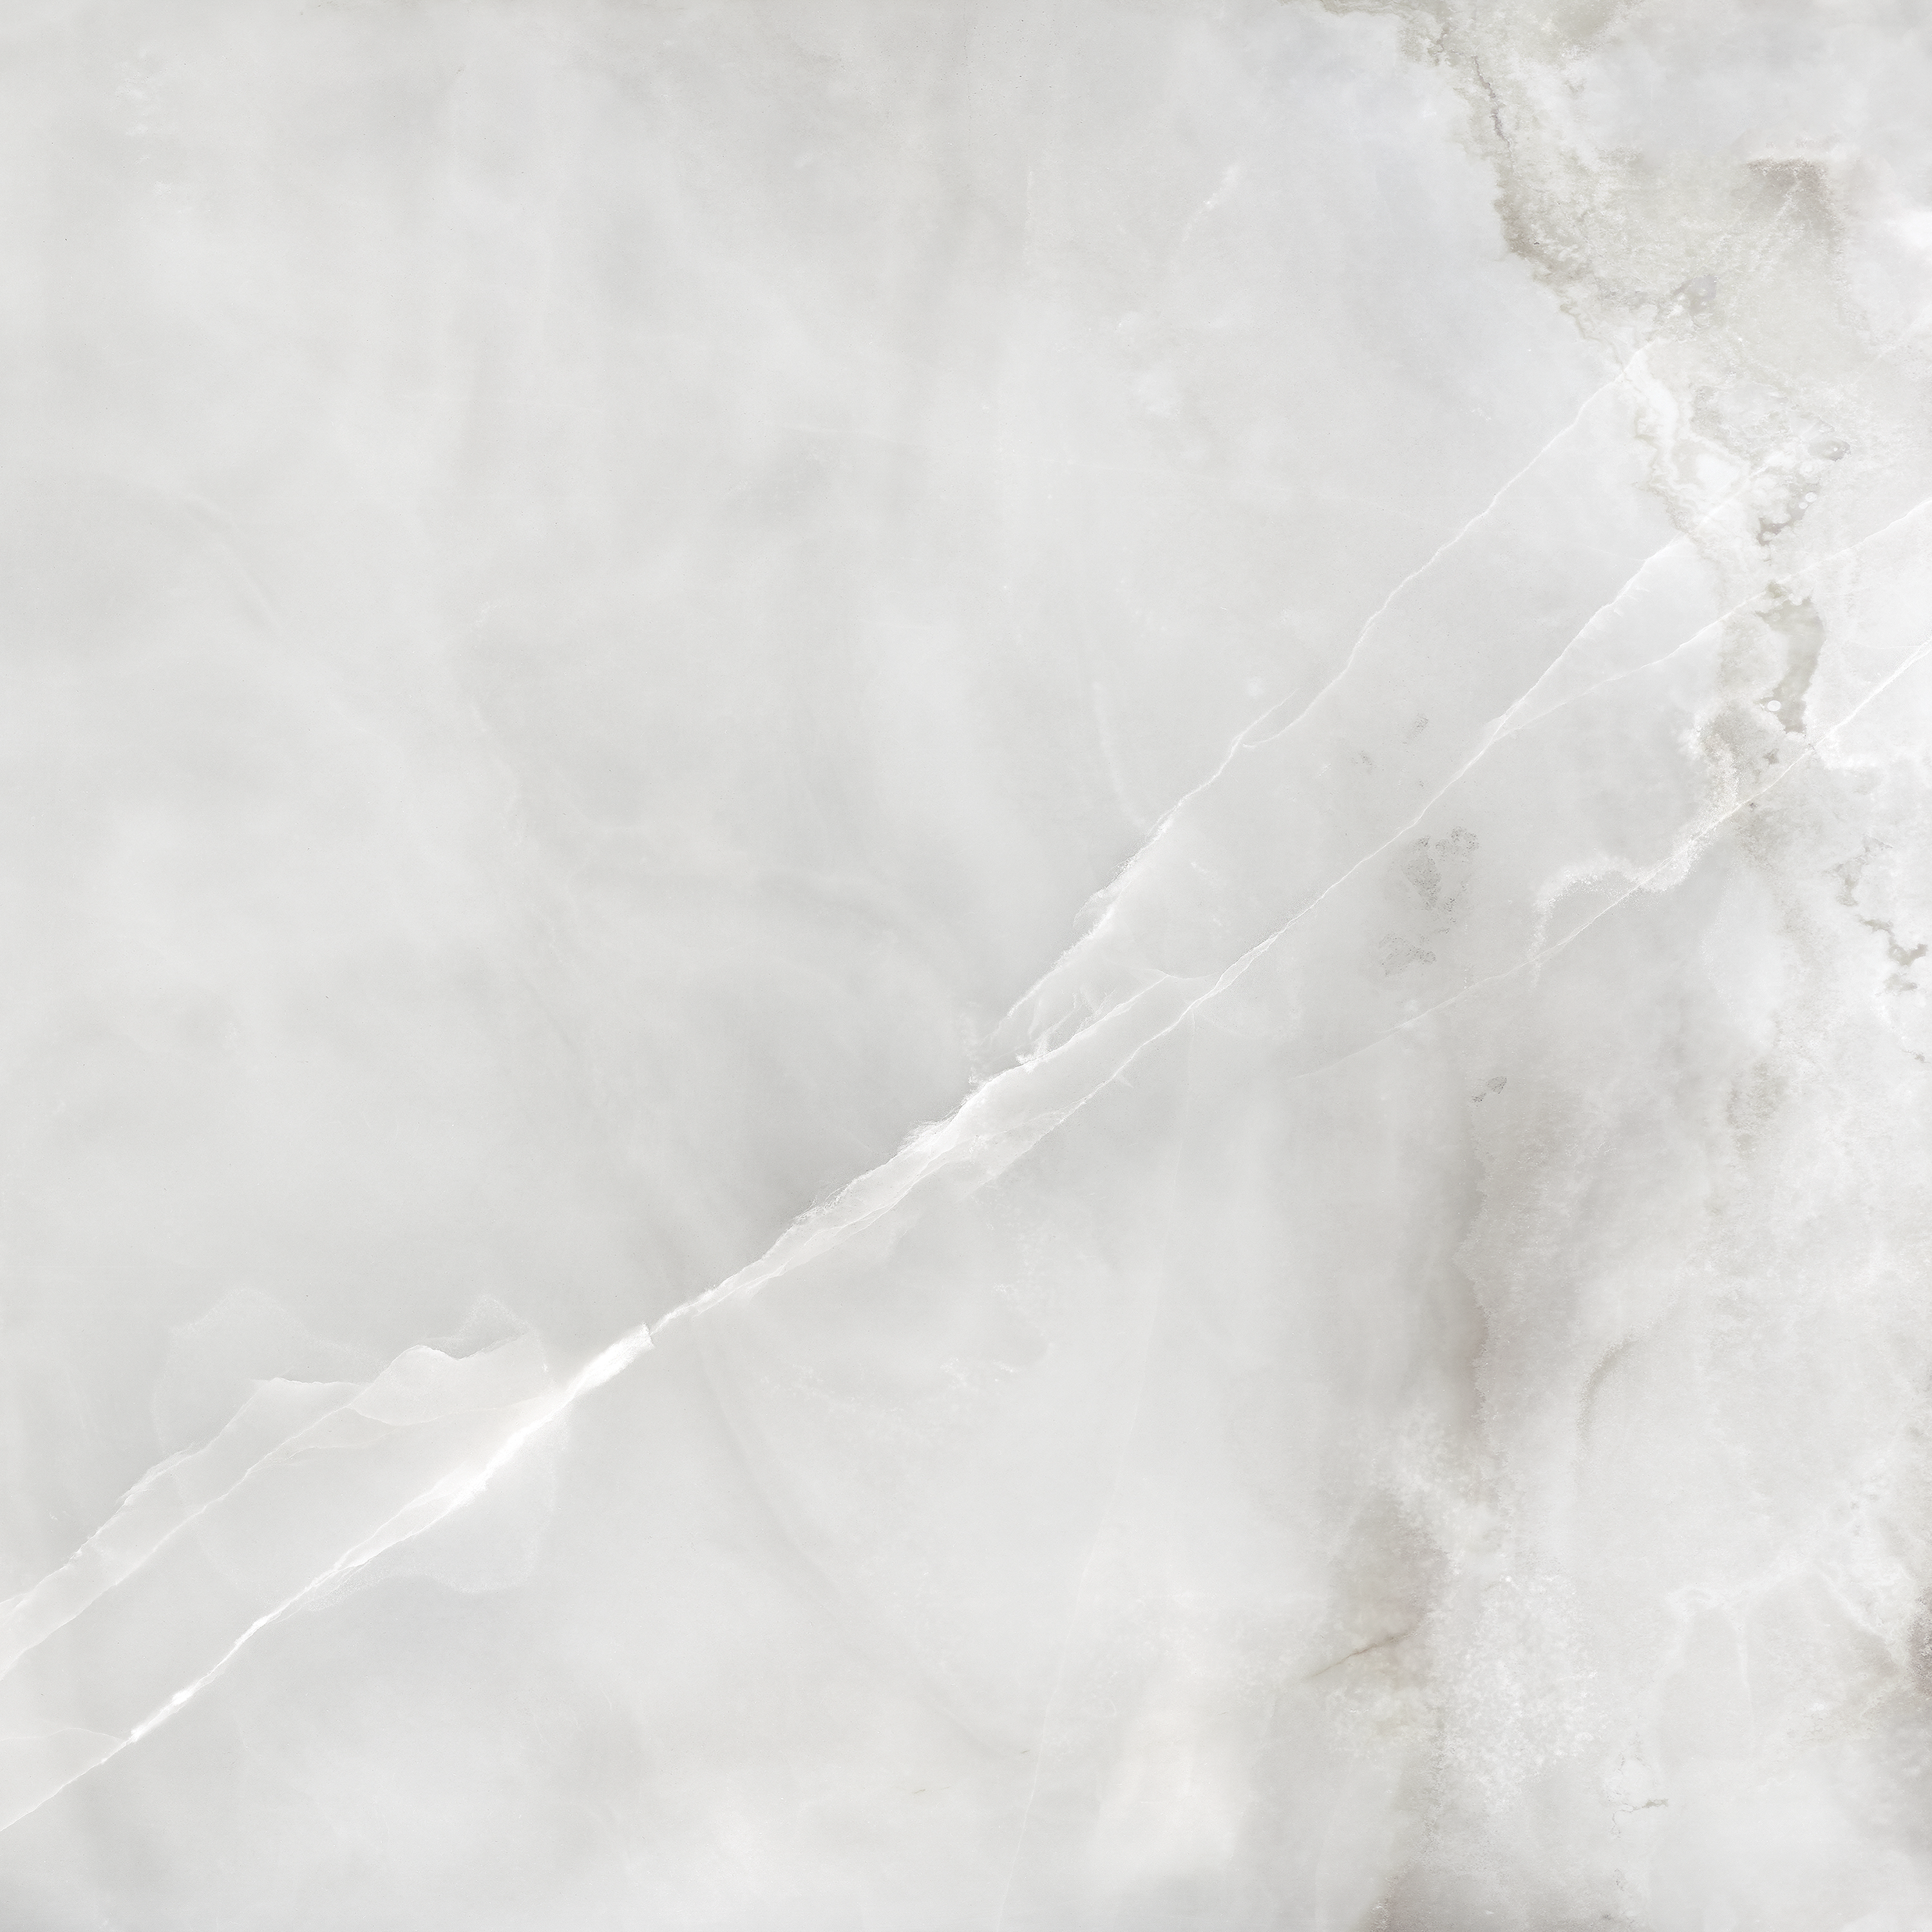 onyx nuvolato pattern glazed porcelain field tile from la marca anatolia collection distributed by surface group international polished finish rectified edge 24x24 square shape